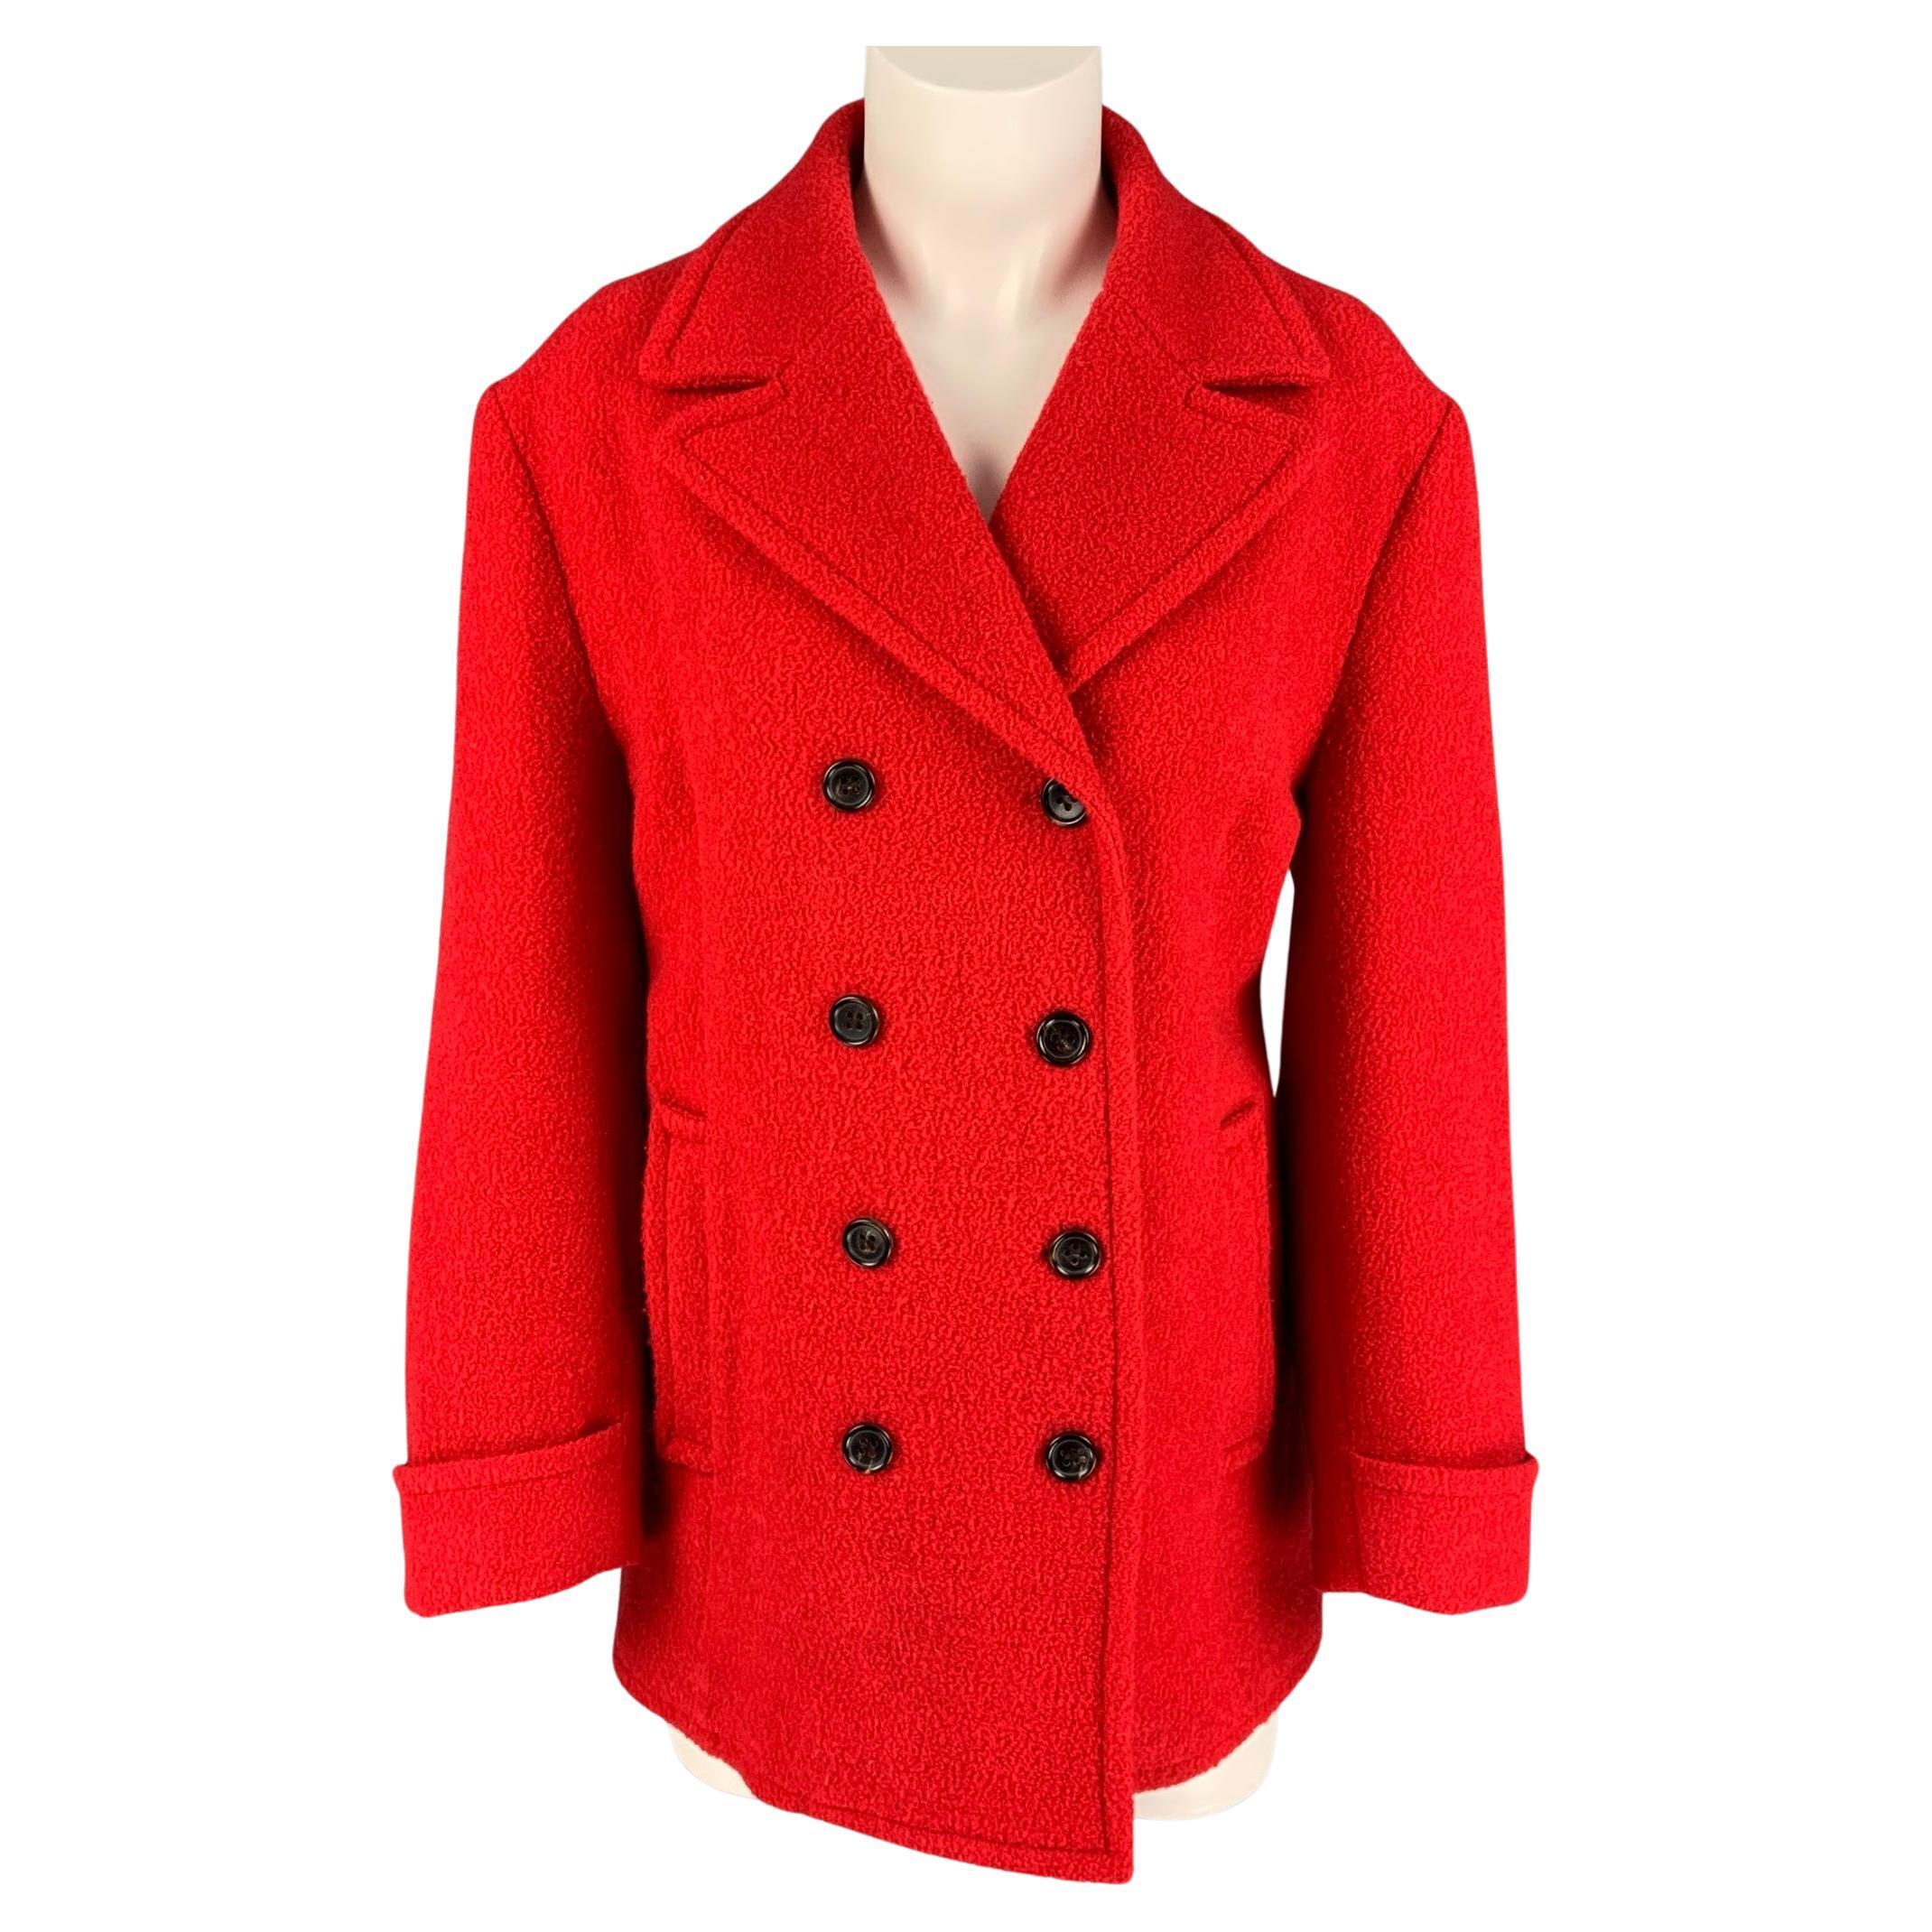 BALLY Size 10 Red Wool Blend Textured Peacoat